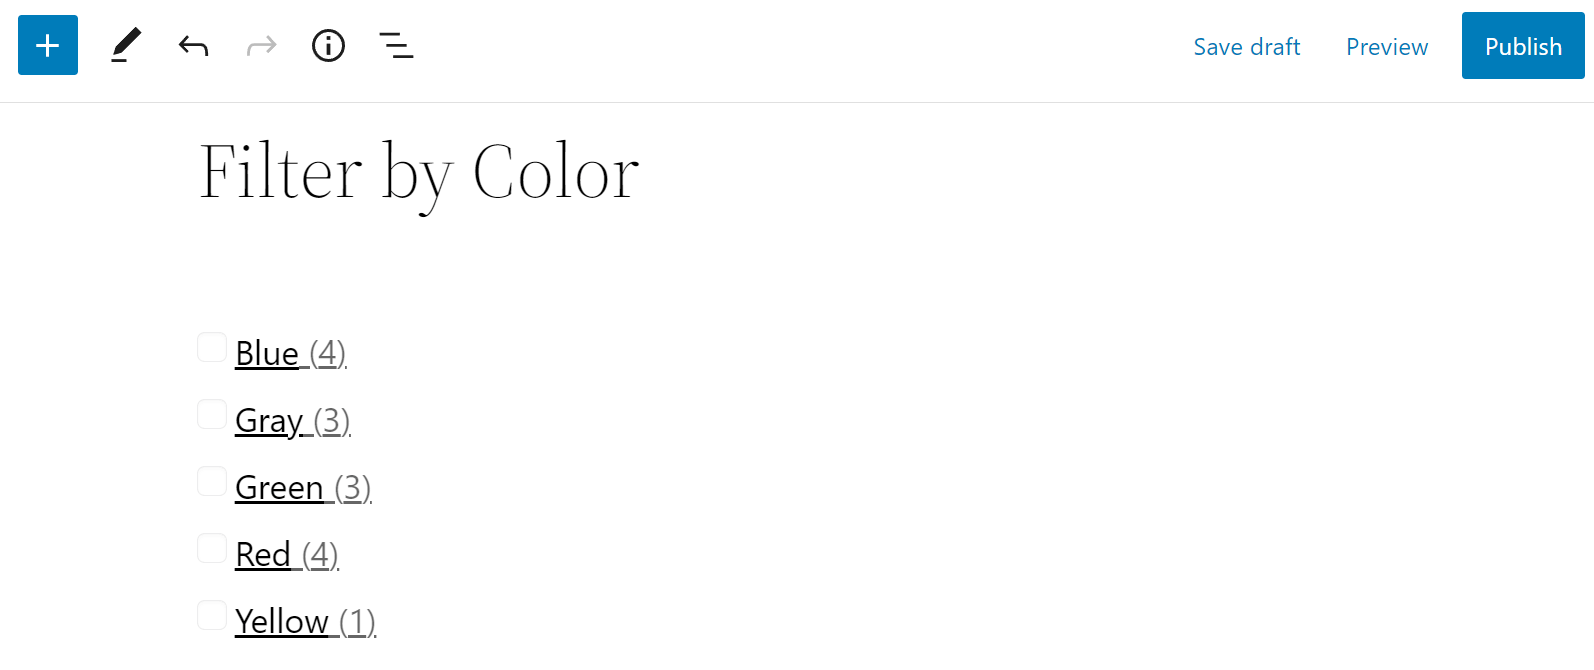 Filter Products by Color 